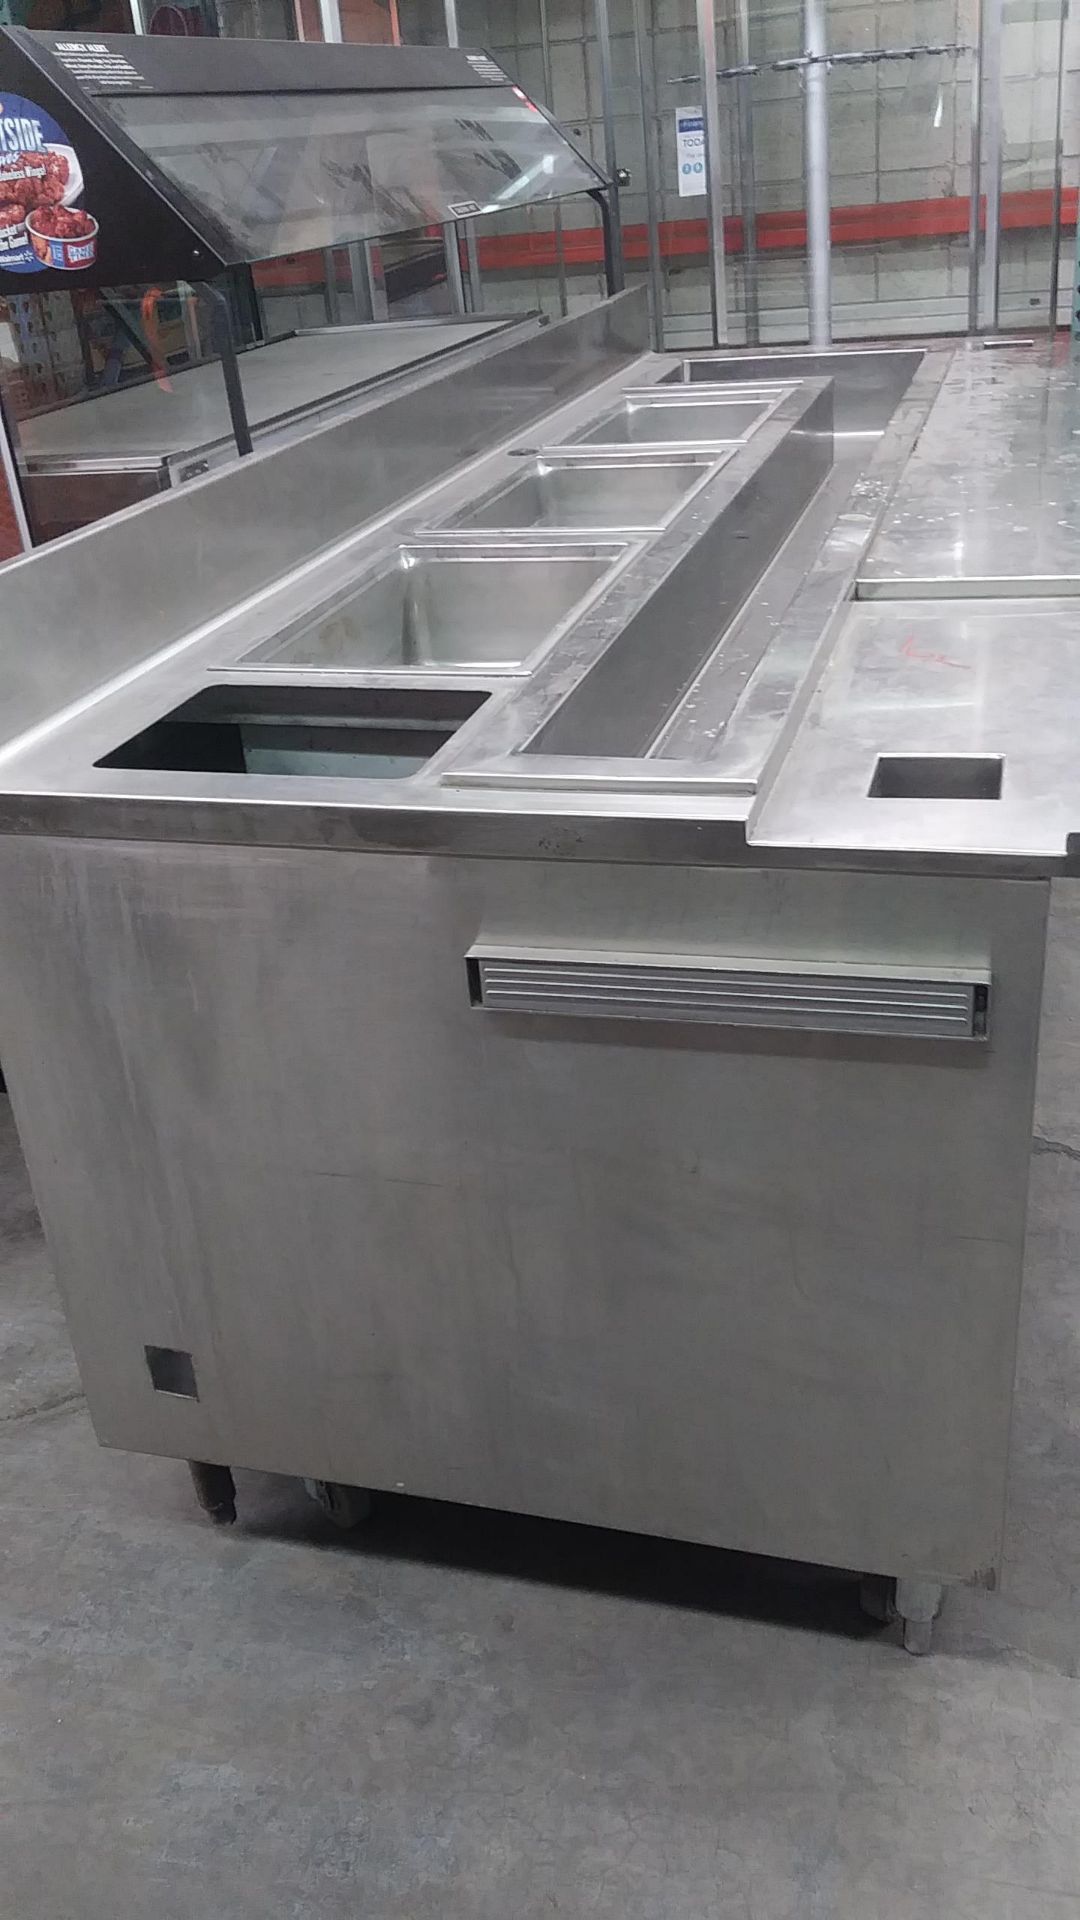 STAINLESS STEAM TABLE (APPROX 108" L x 33" H x 37" D) - Image 3 of 4